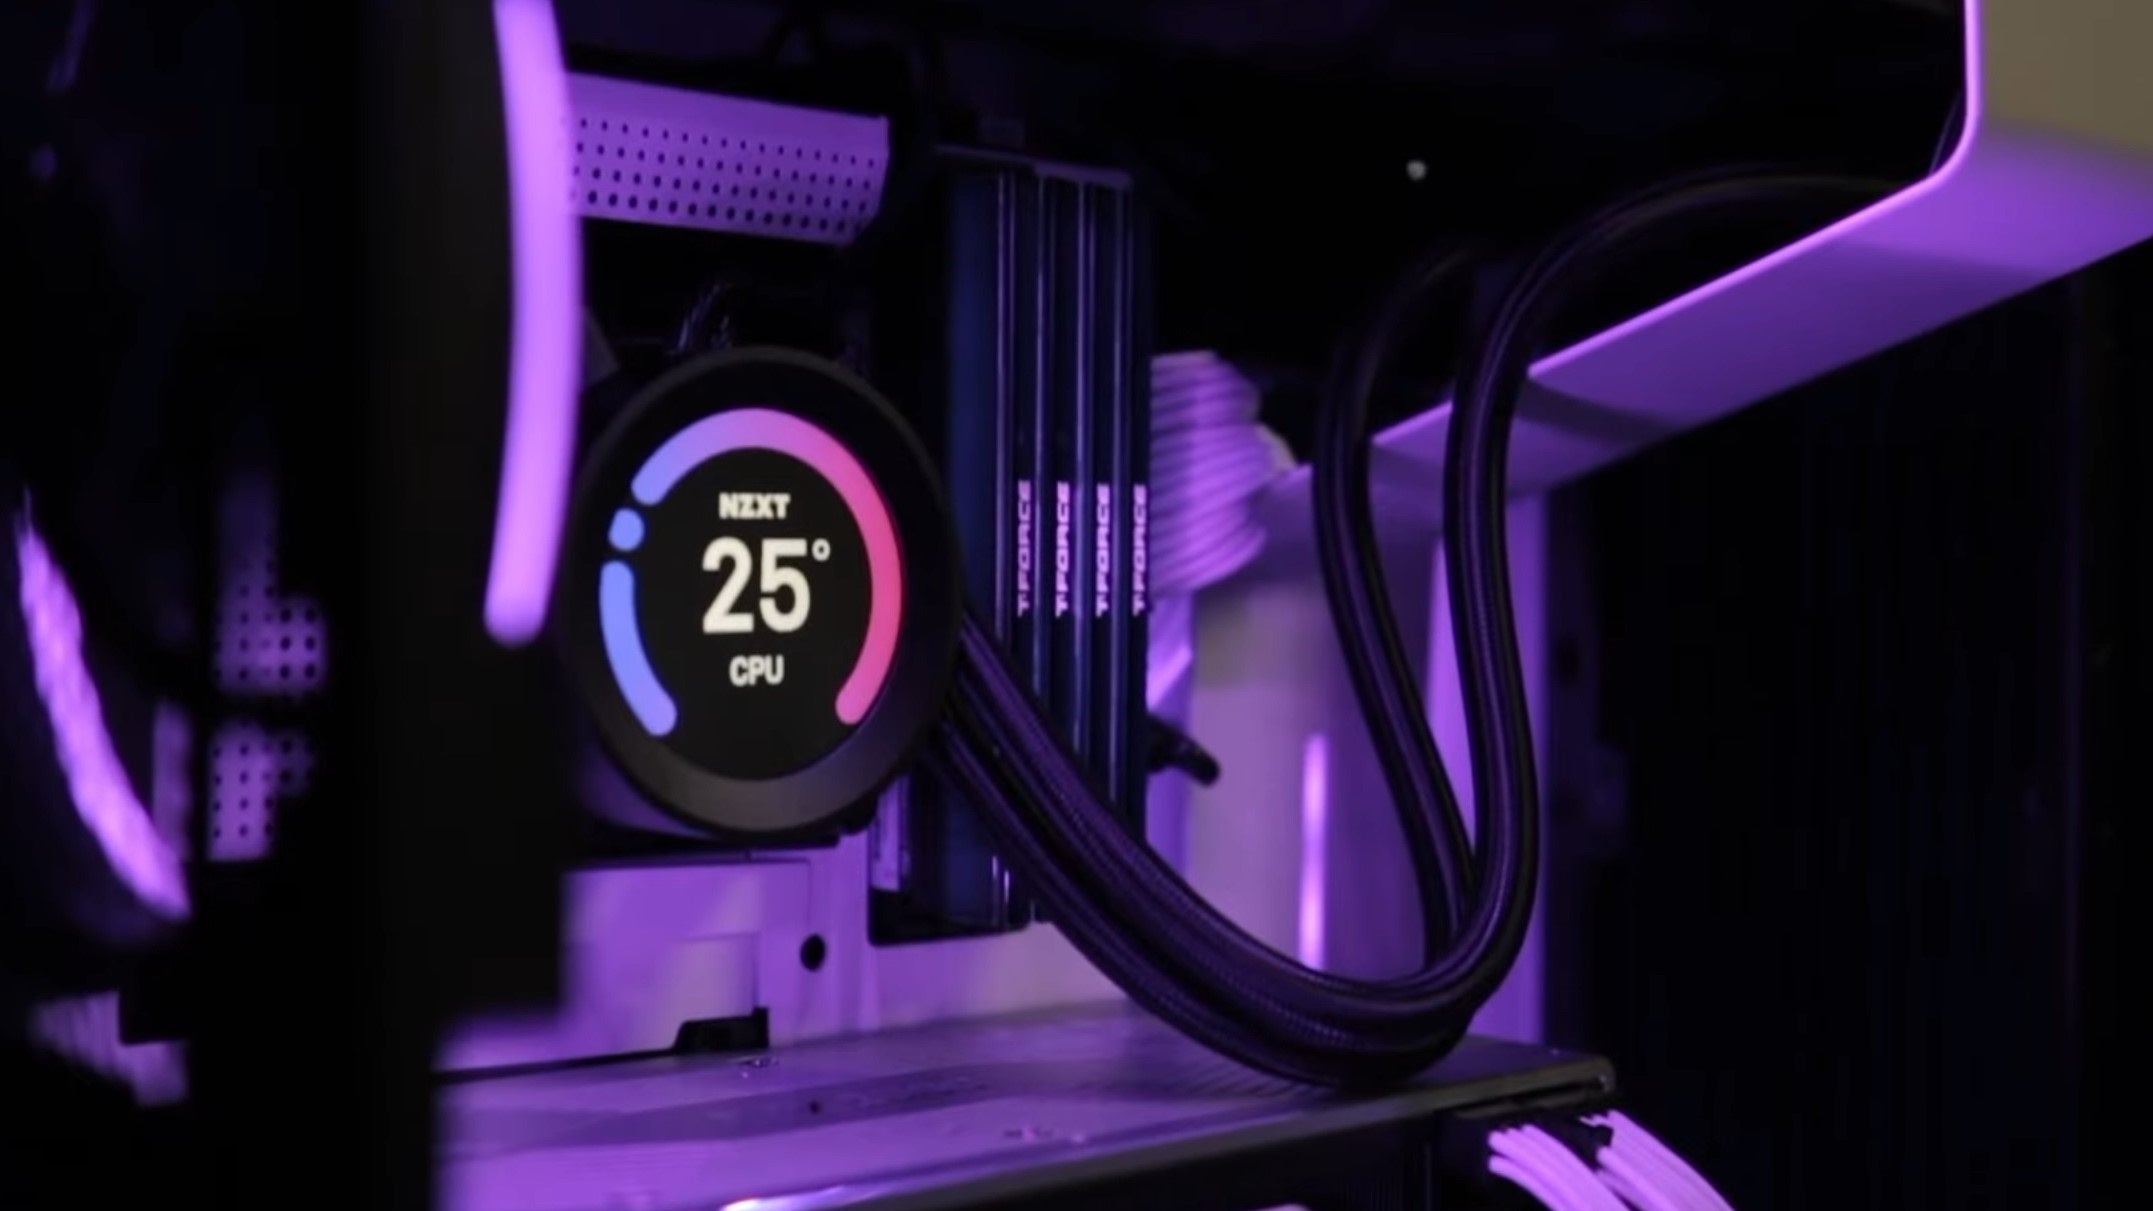 The NZXT Kraken Z63 AIO watercooler displaying the CPU temperature on its screen.